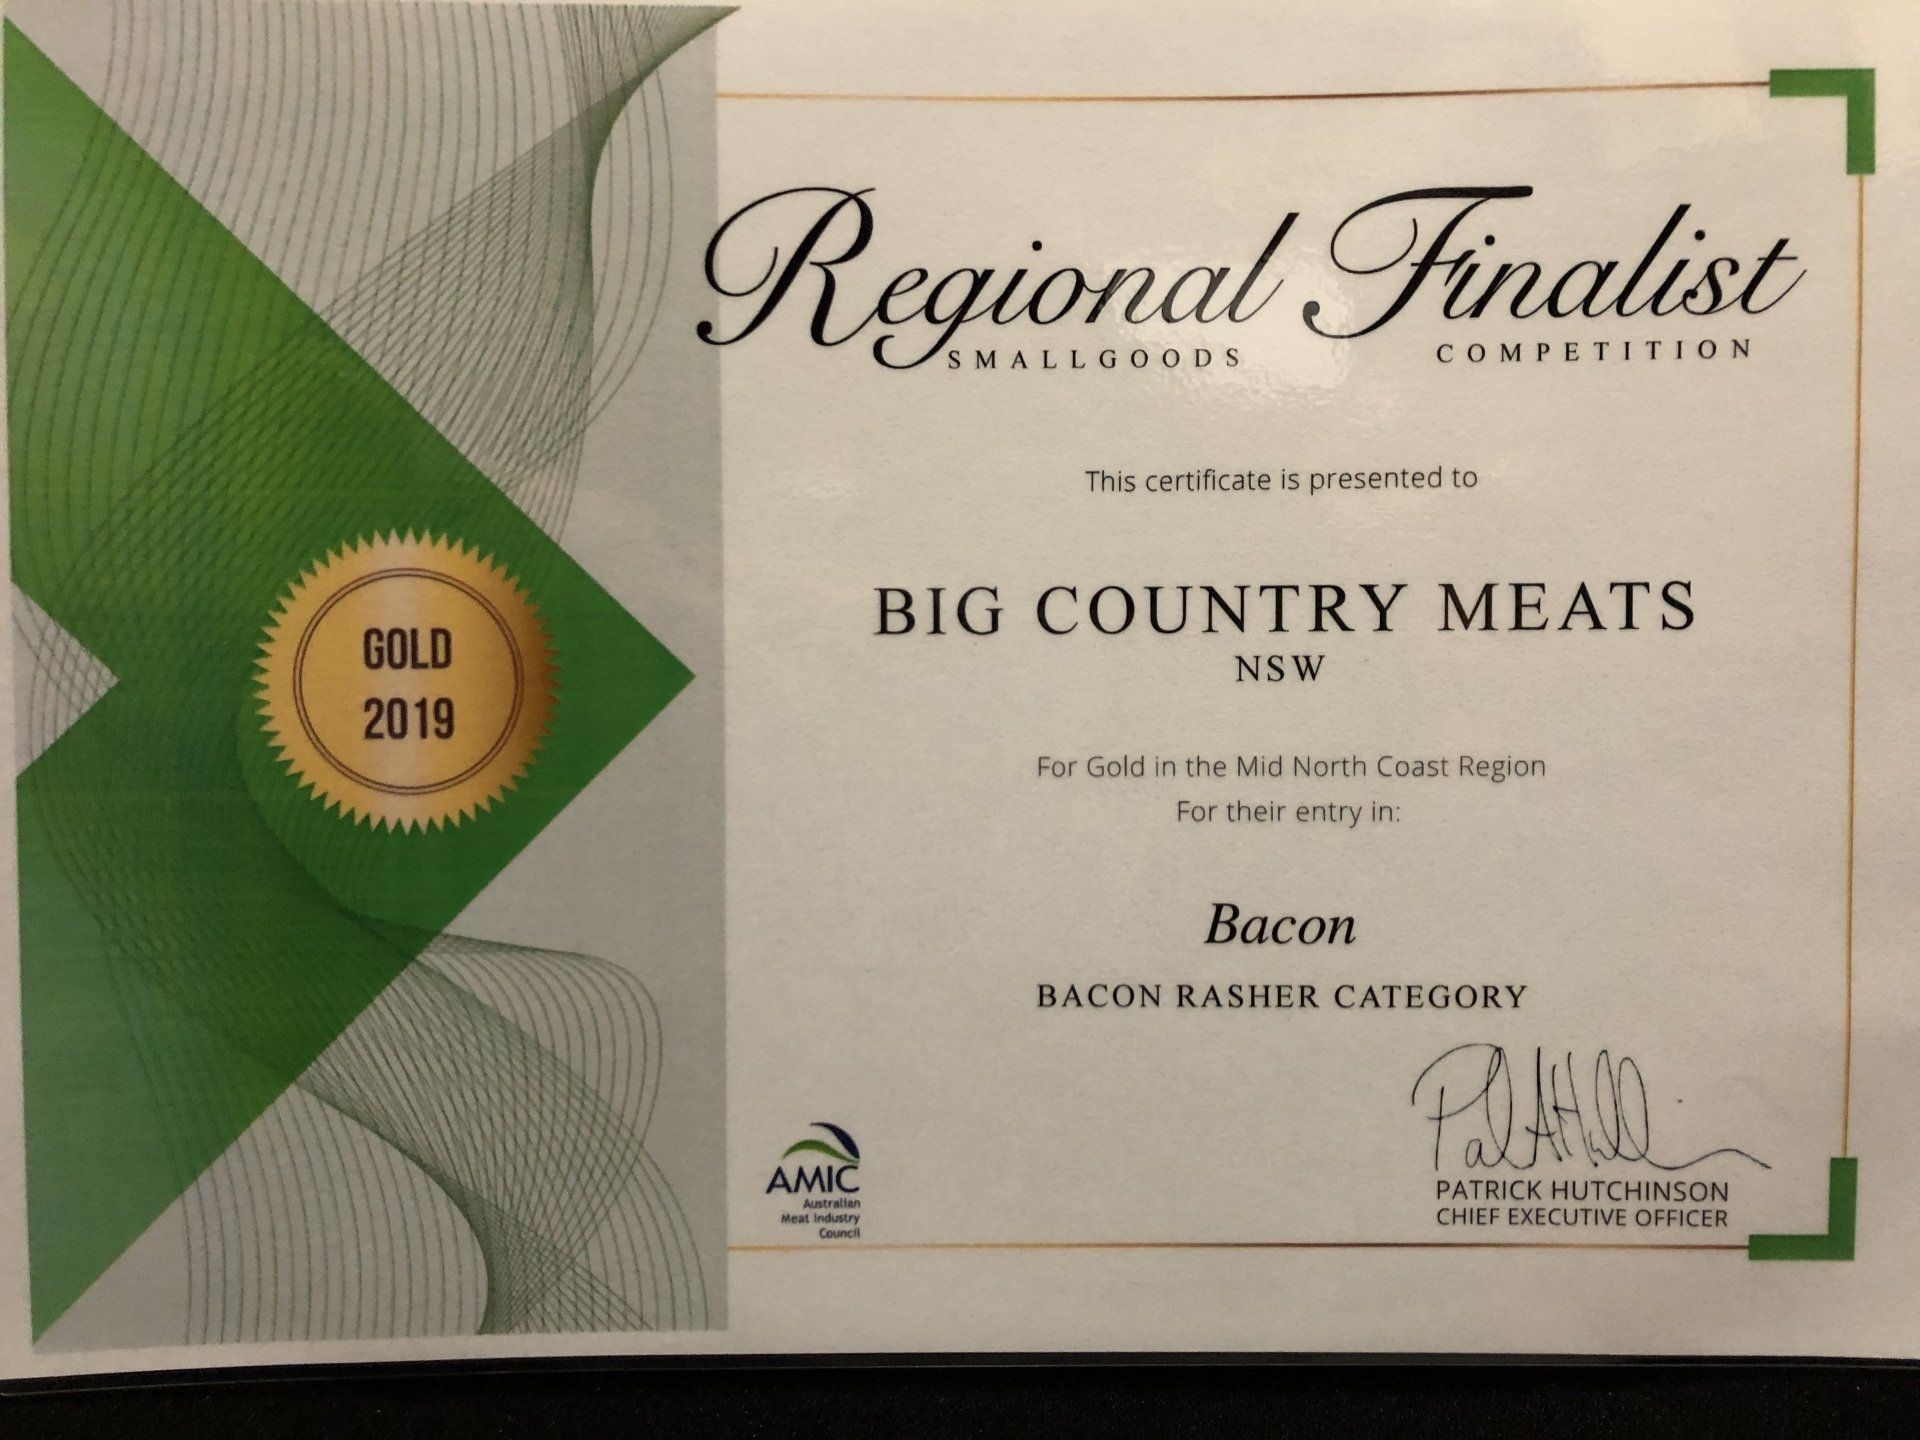 Gold in the 2019 Regional Smallgoods Competition for Bacon